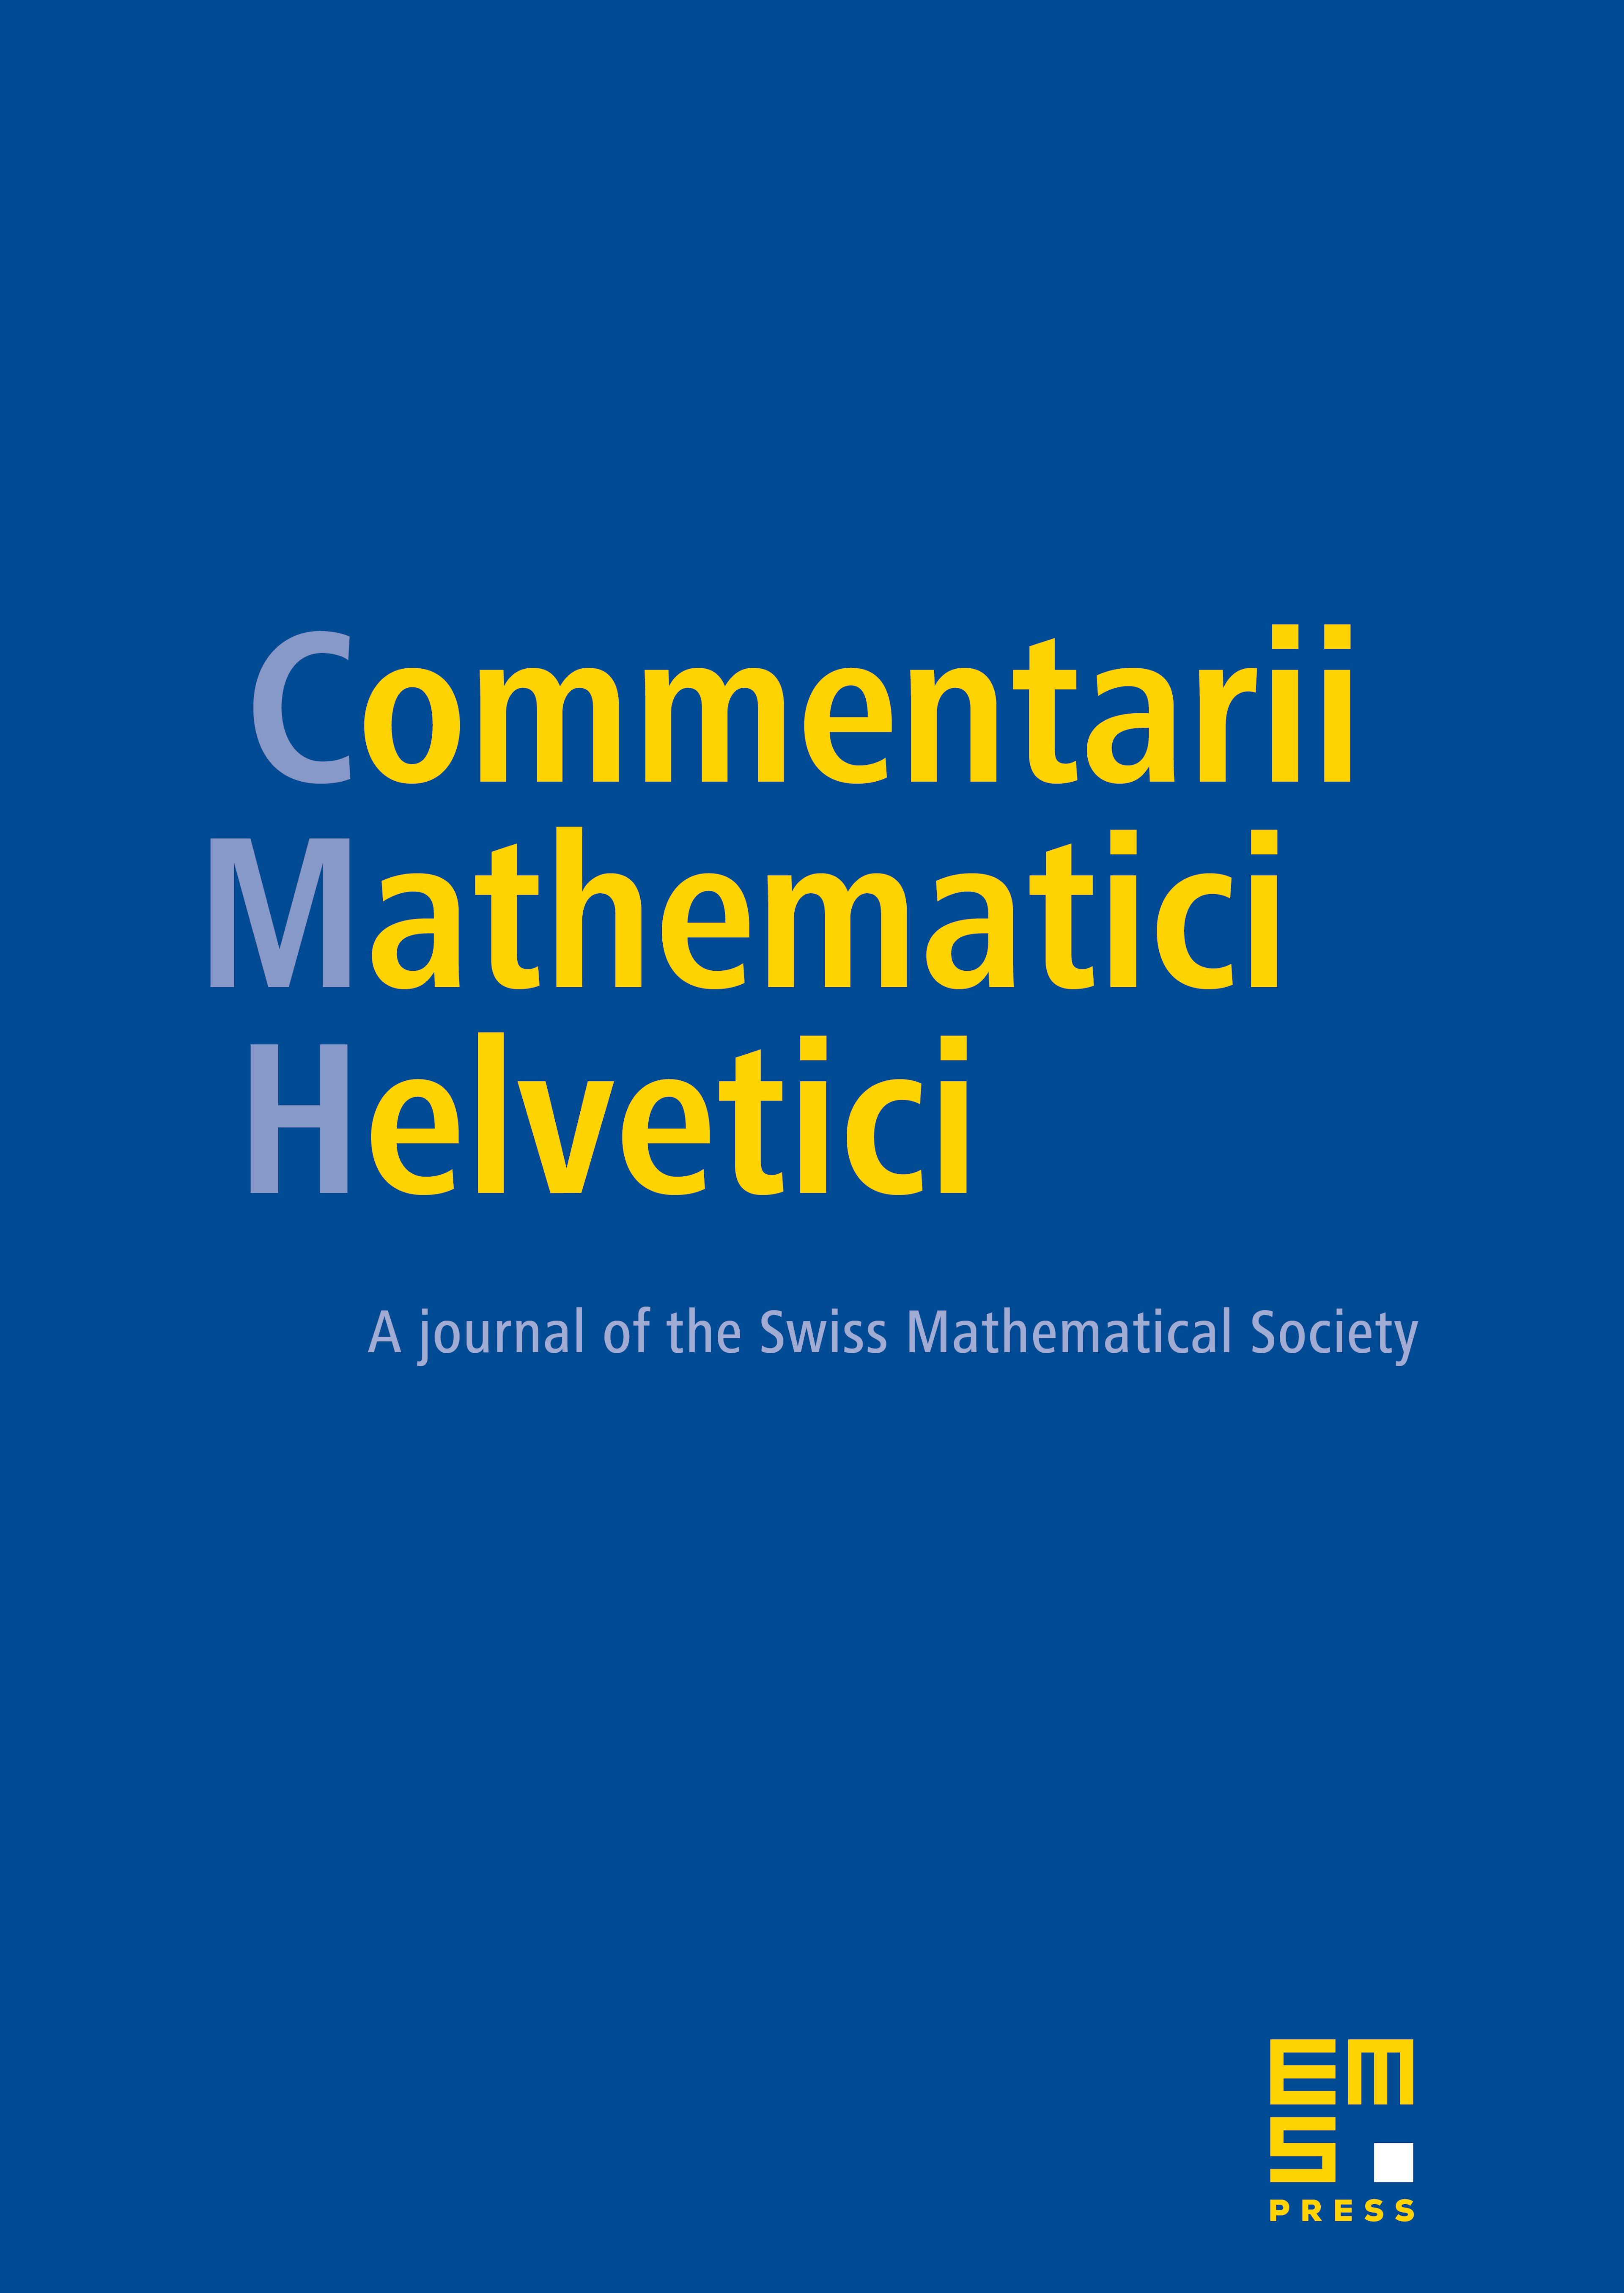 Conformal arc-length as ½-dimensional length of the set of osculating circles cover